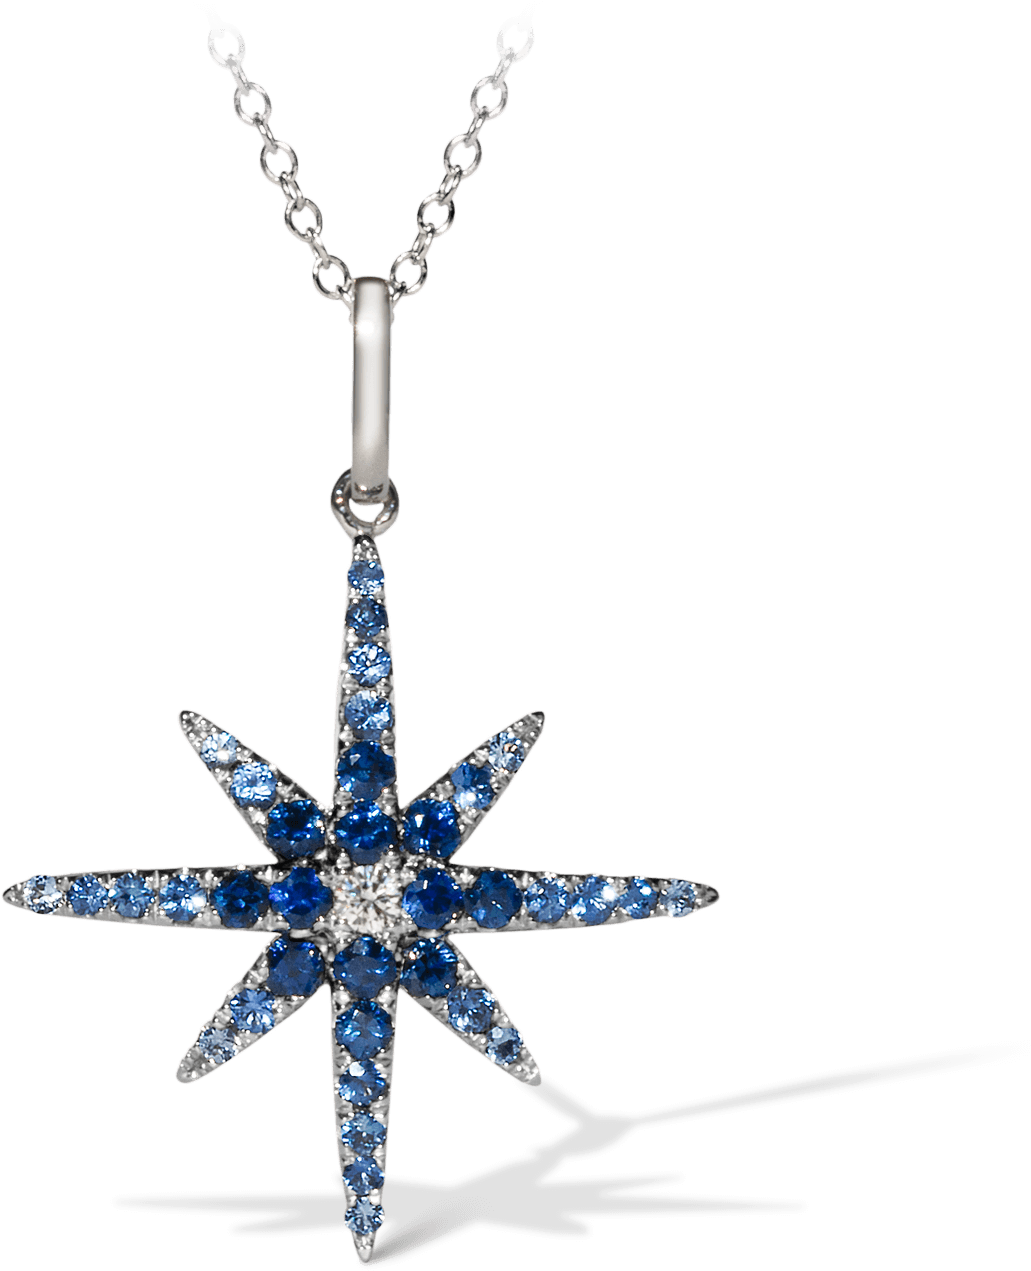 Star Pendant Blue Gemstones Silver Chain PNG